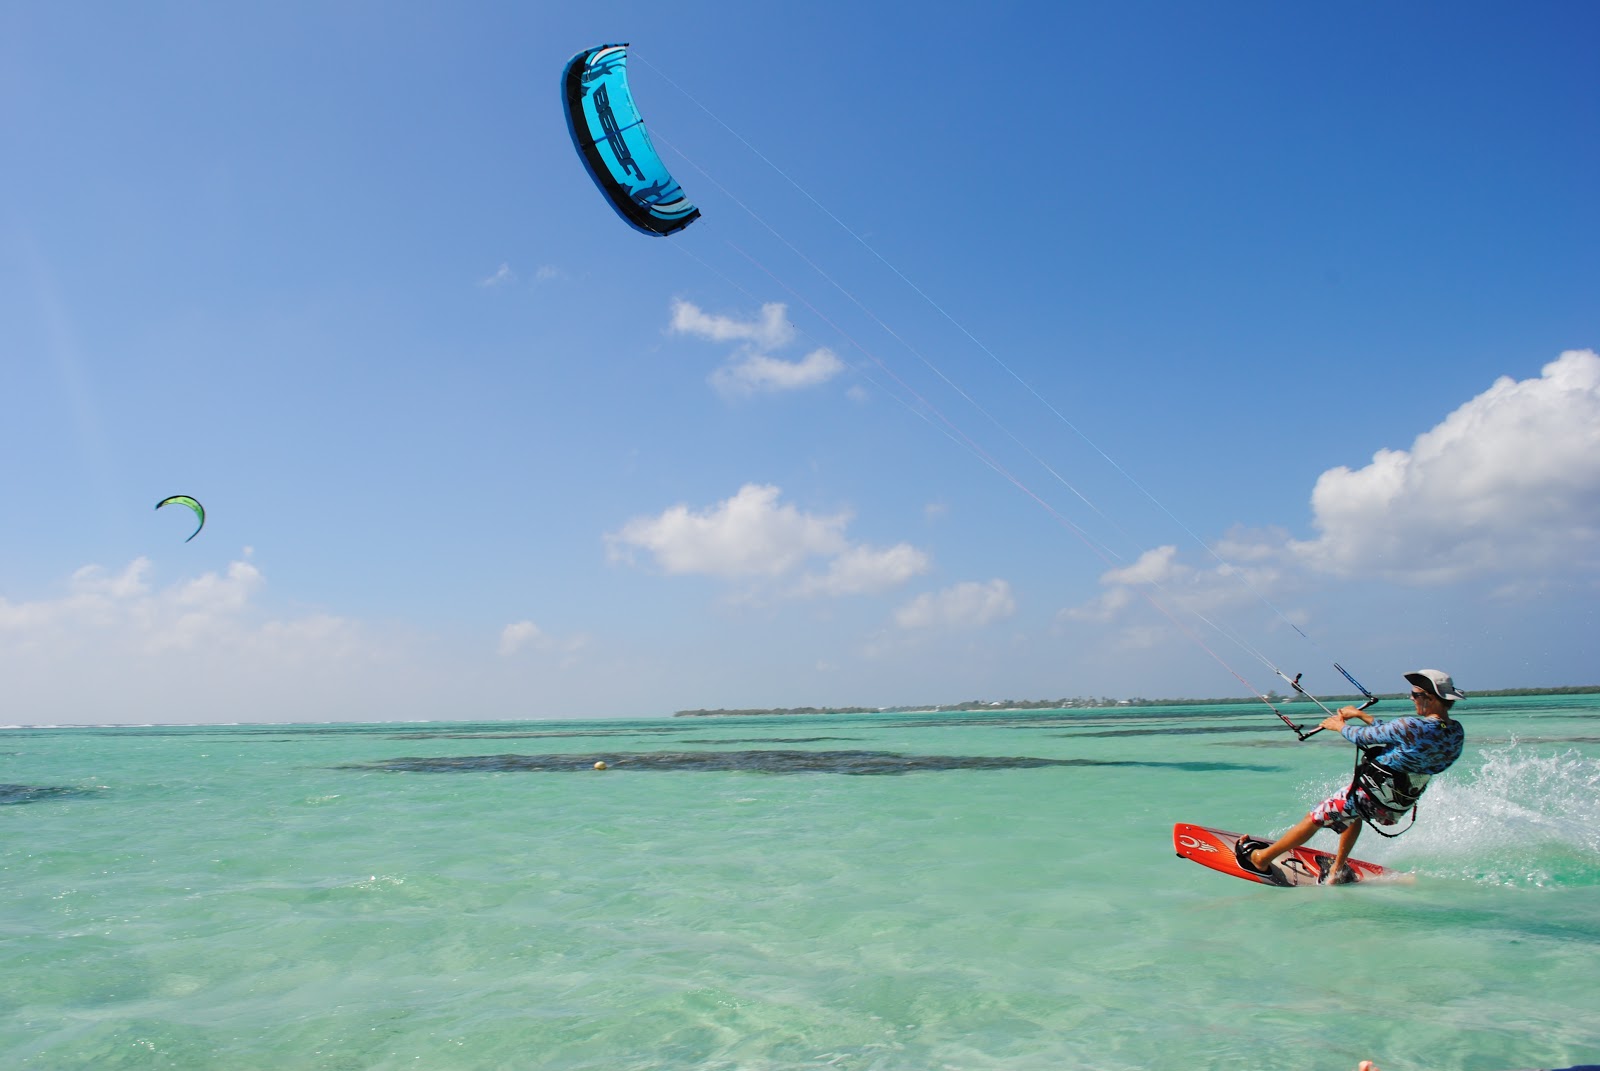 Kite surfing in the Cayman Islands